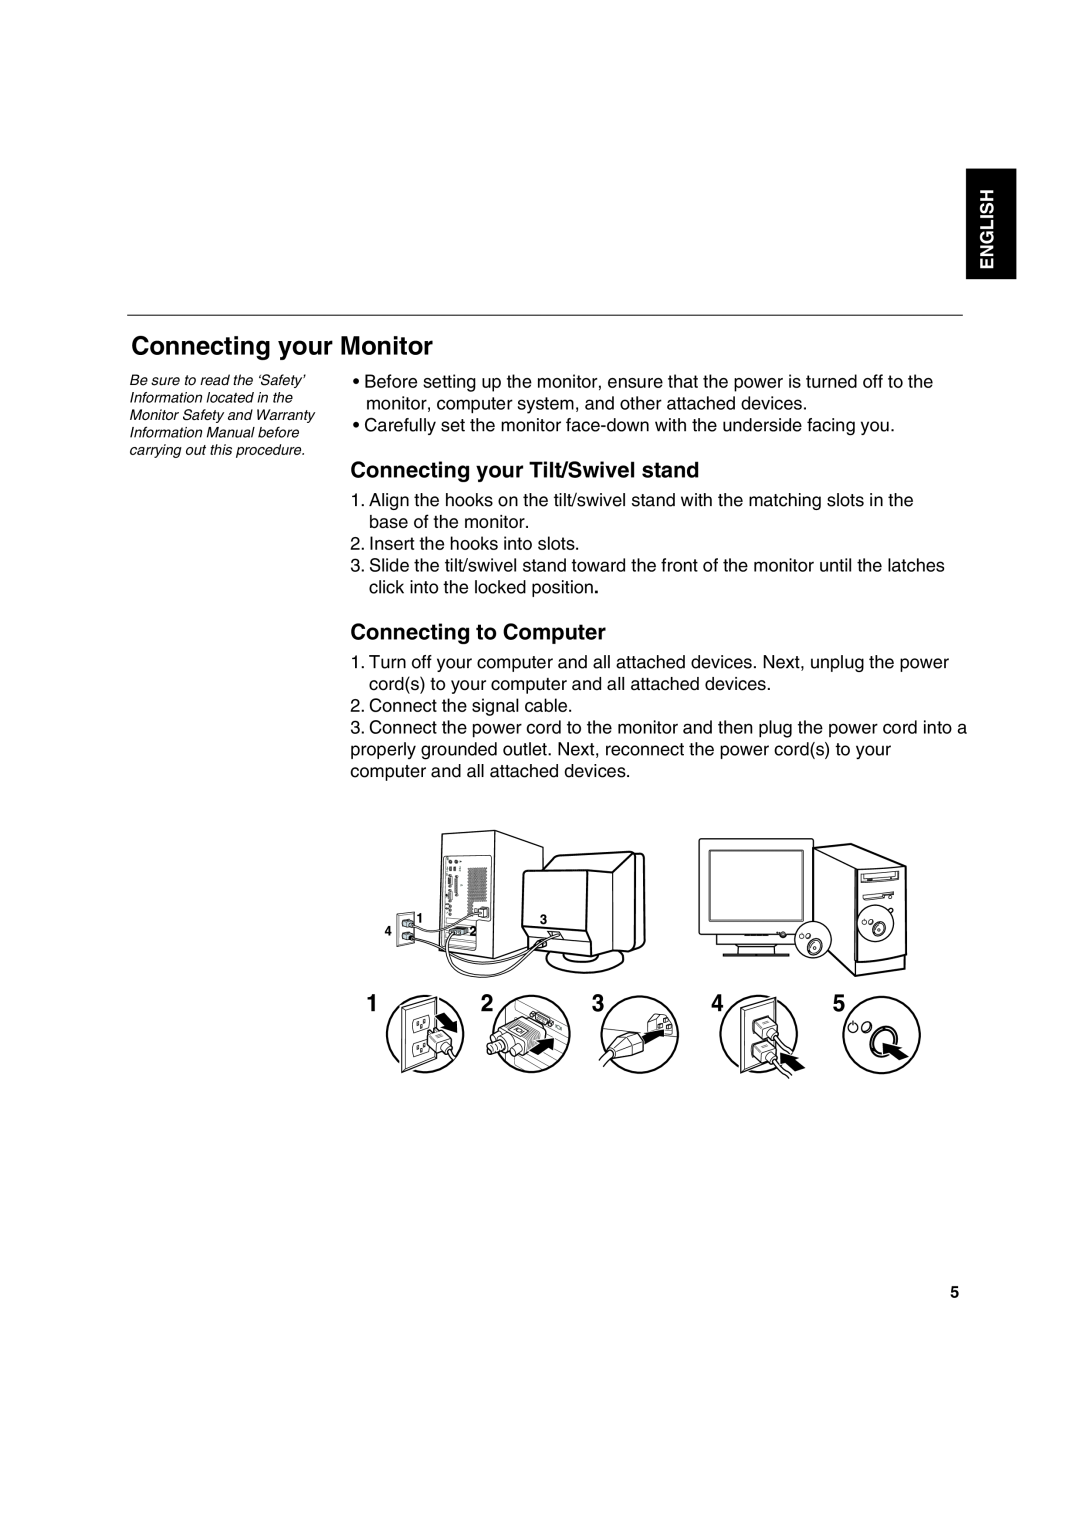 IBM C170 manual Connecting your Monitor, Connecting your Tilt/Swivel stand, Connecting to Computer, English 